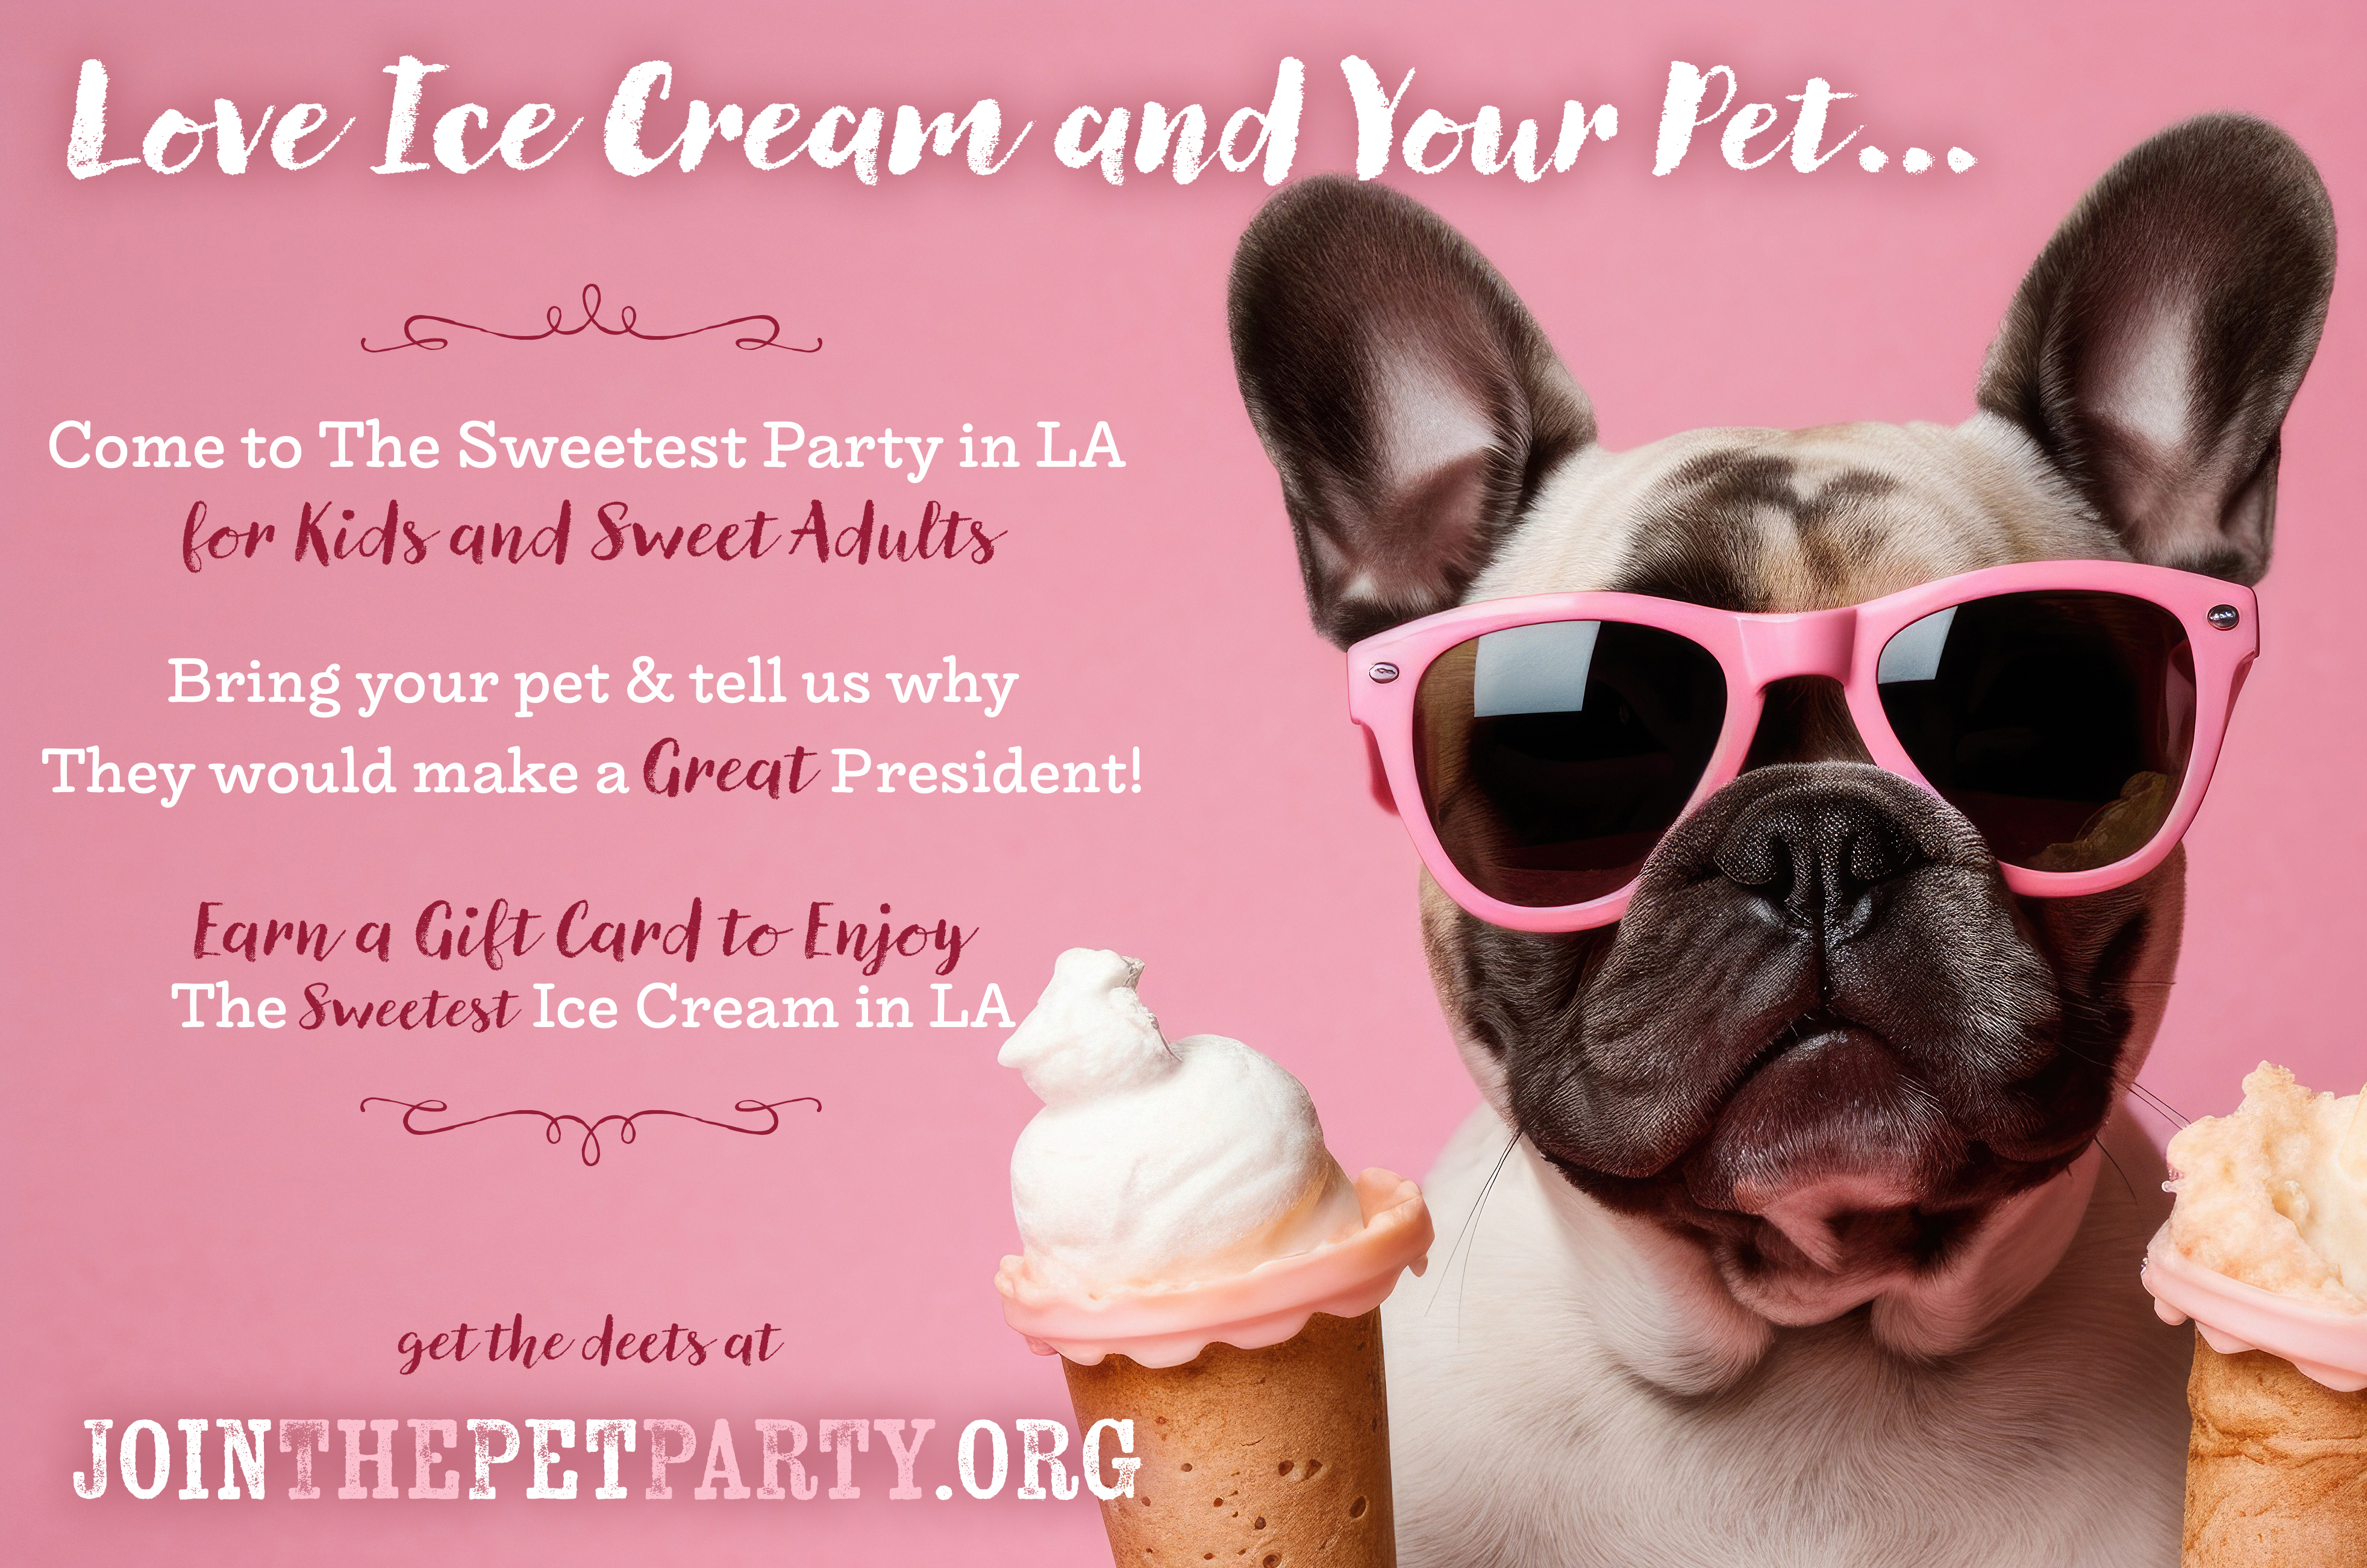 Love to Party for Good? Attend The Sweetest Party in LA for Happy Pets and Sweet Human Friends Celebrate The 4th of July Weekend www.JoinThePetParty.org